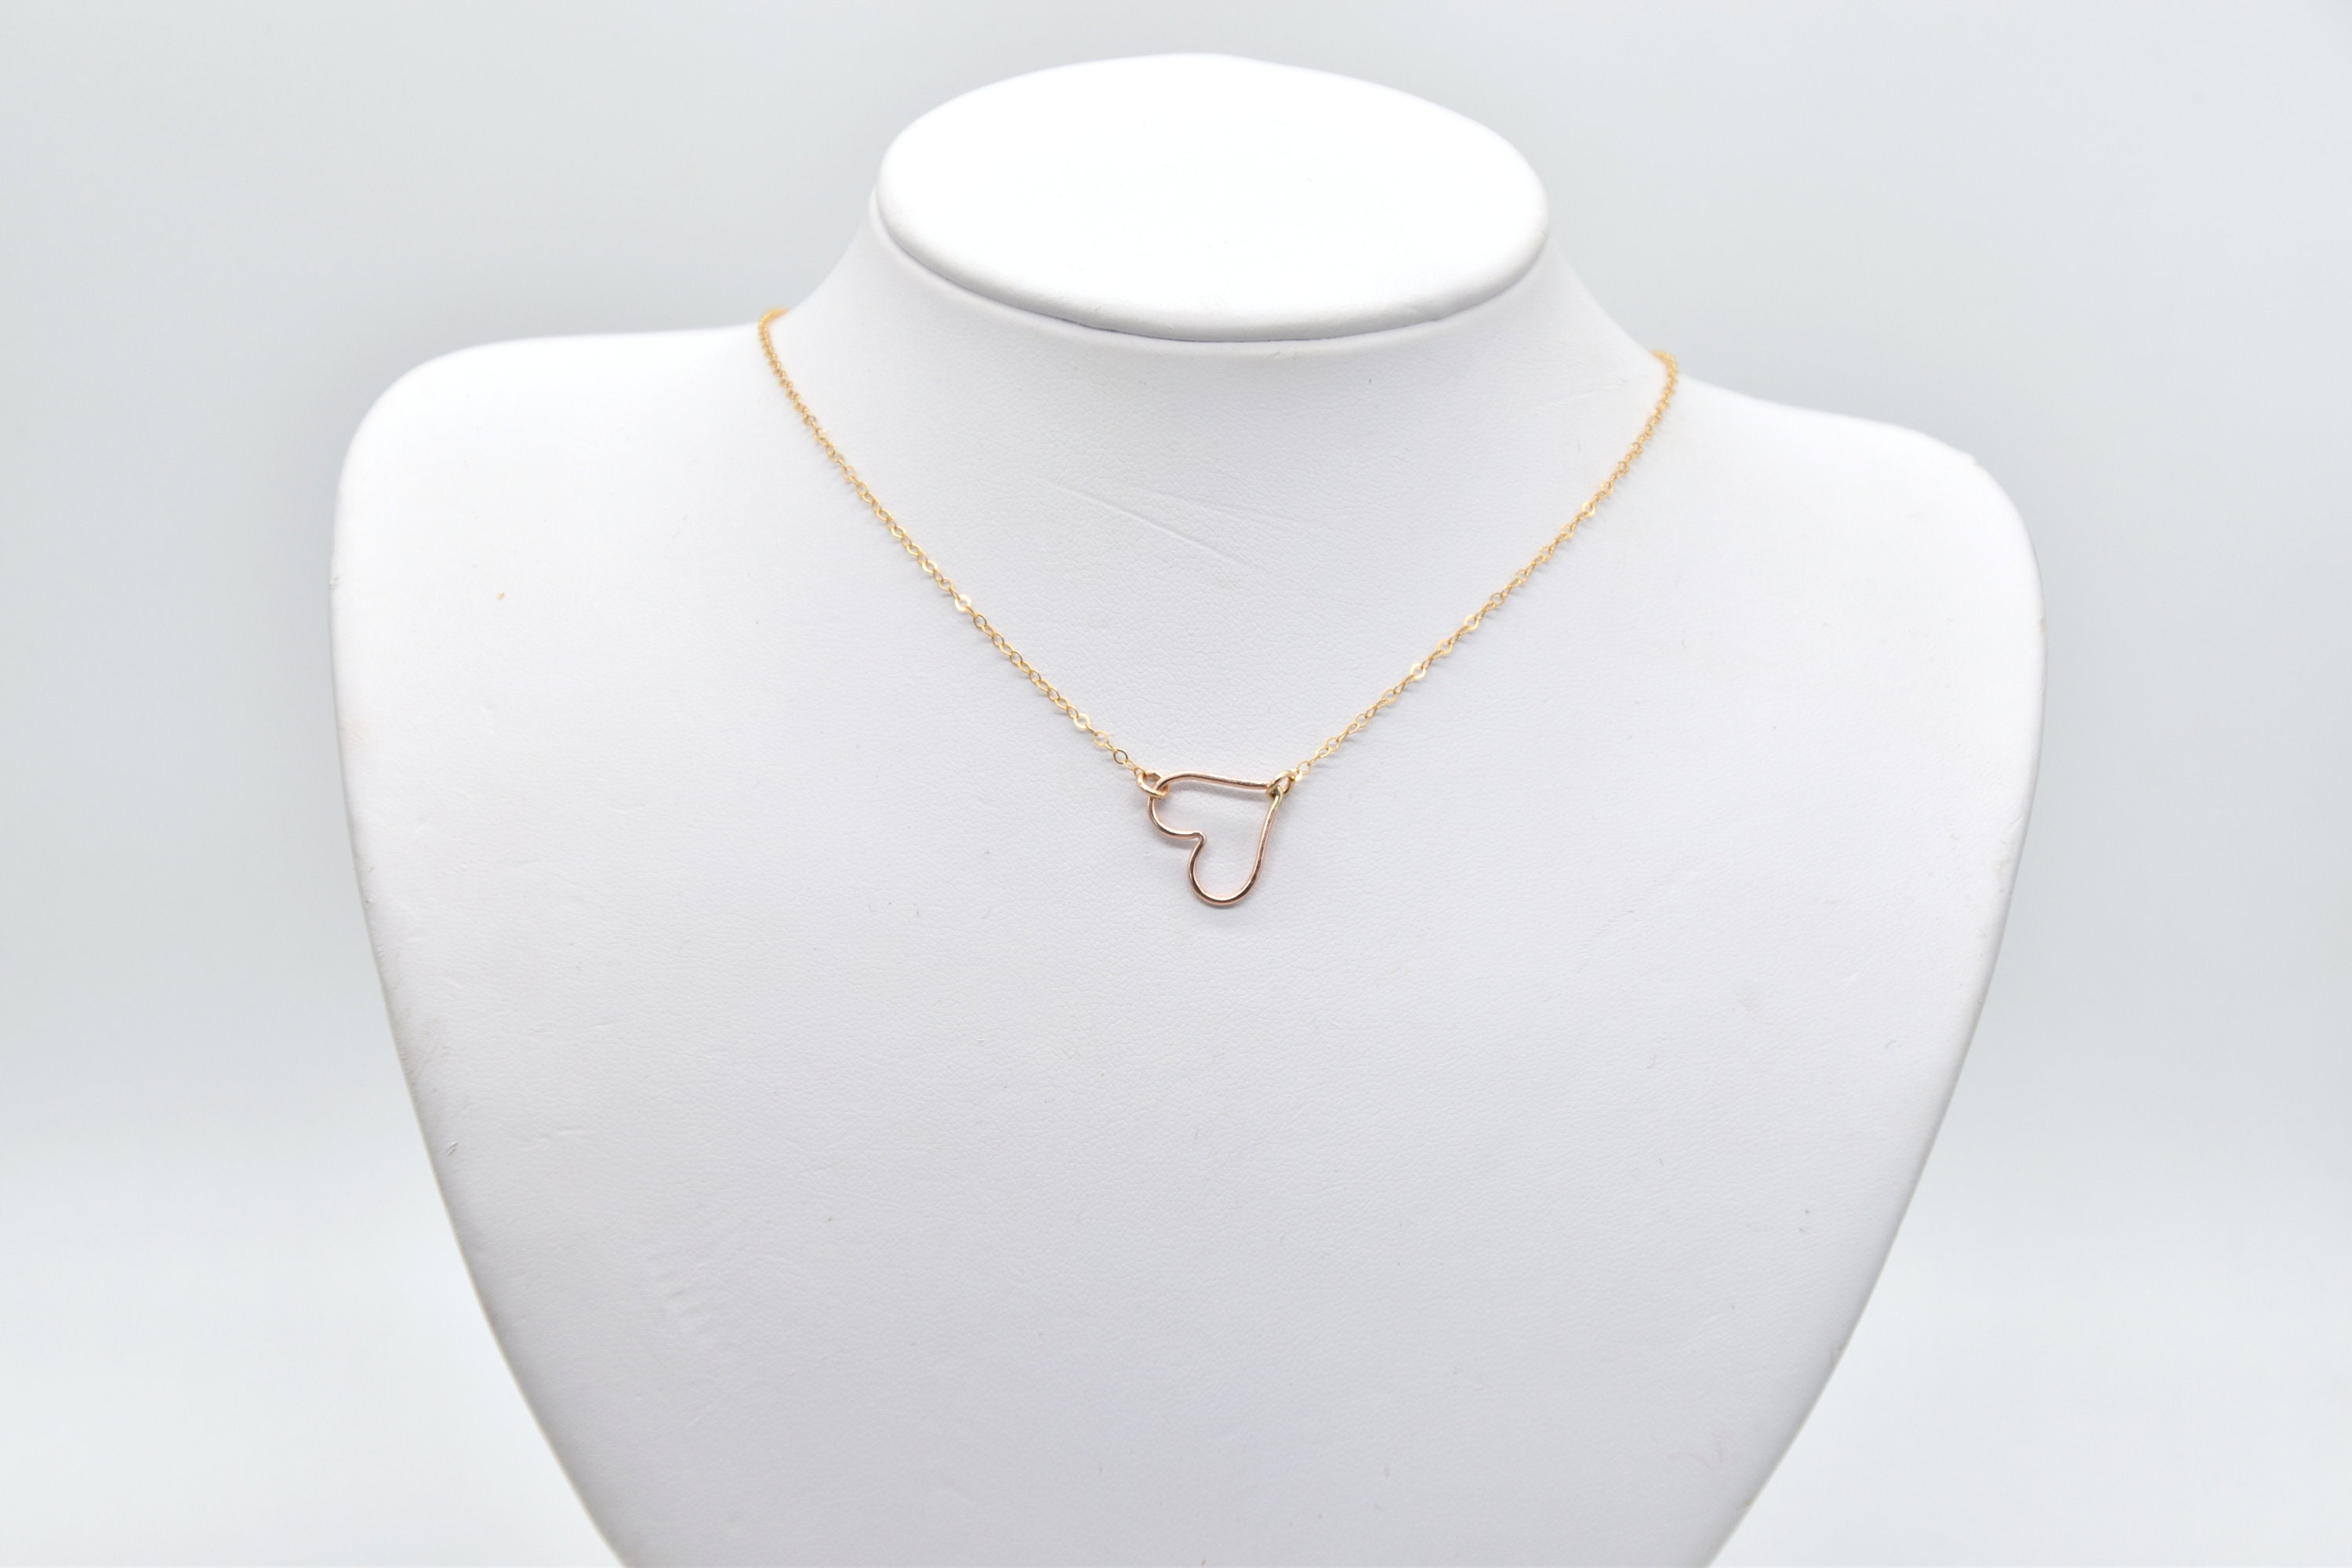 Itty Bitty Heart Necklace – James Michelle